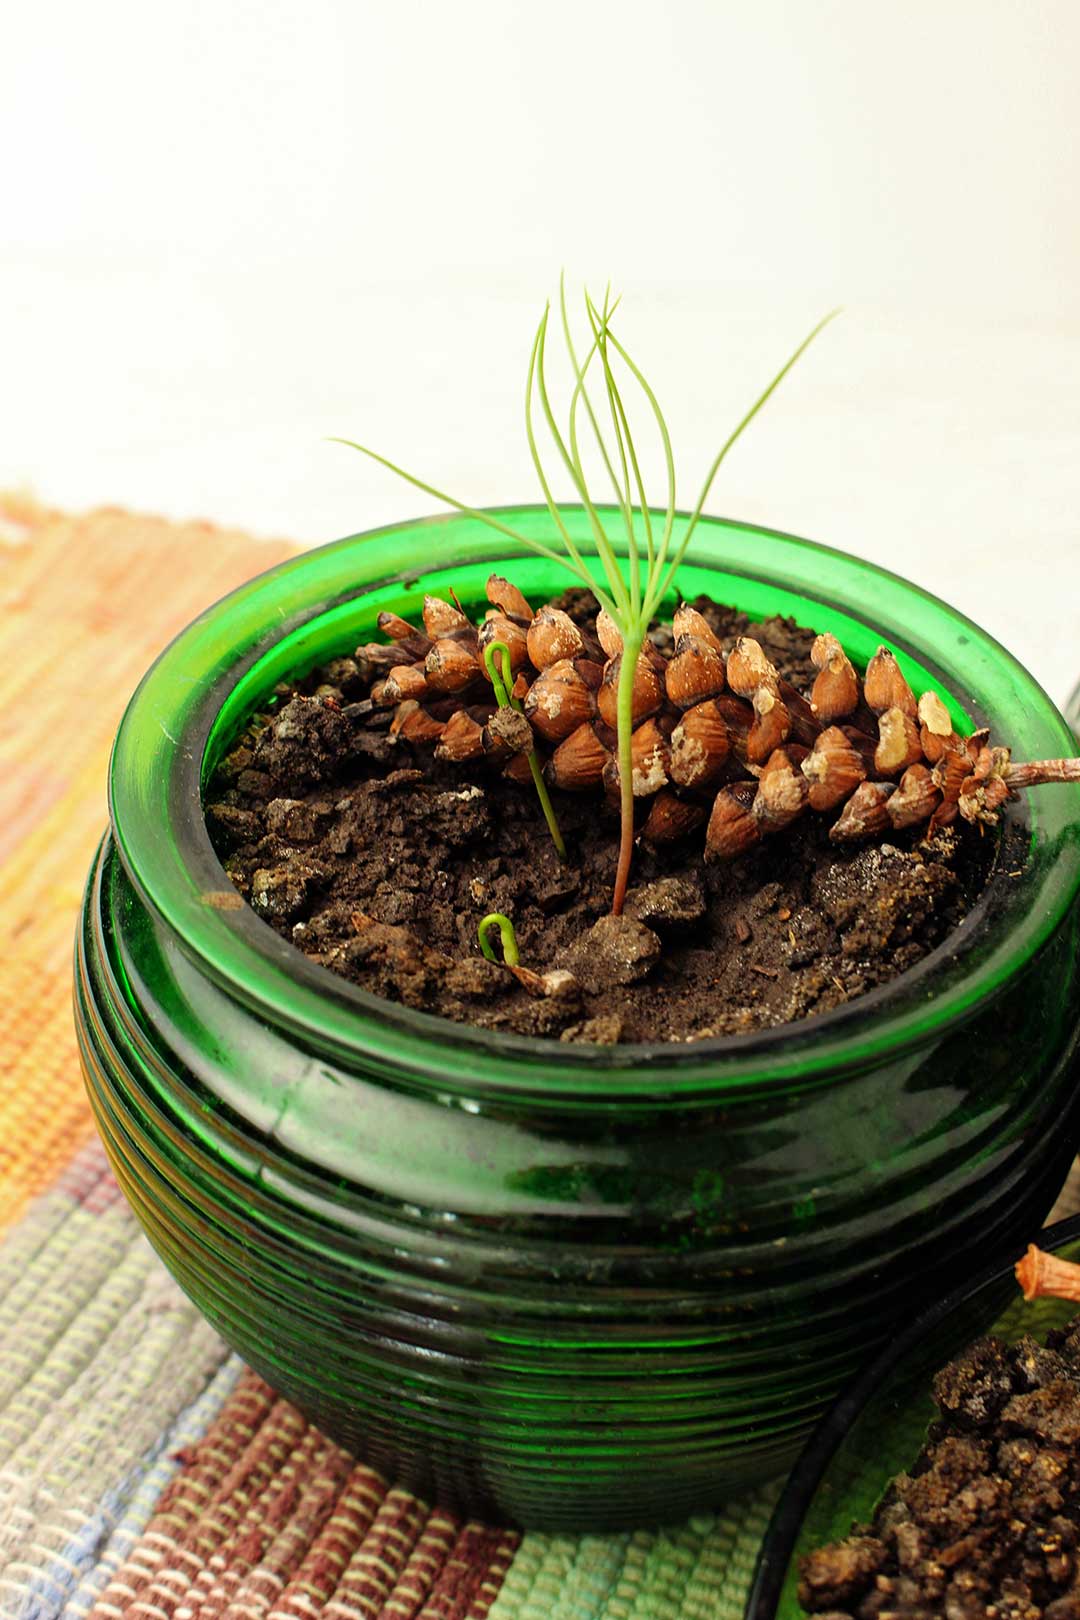 Sprouts growing out of green glass pot sitting on plaid place mat.
